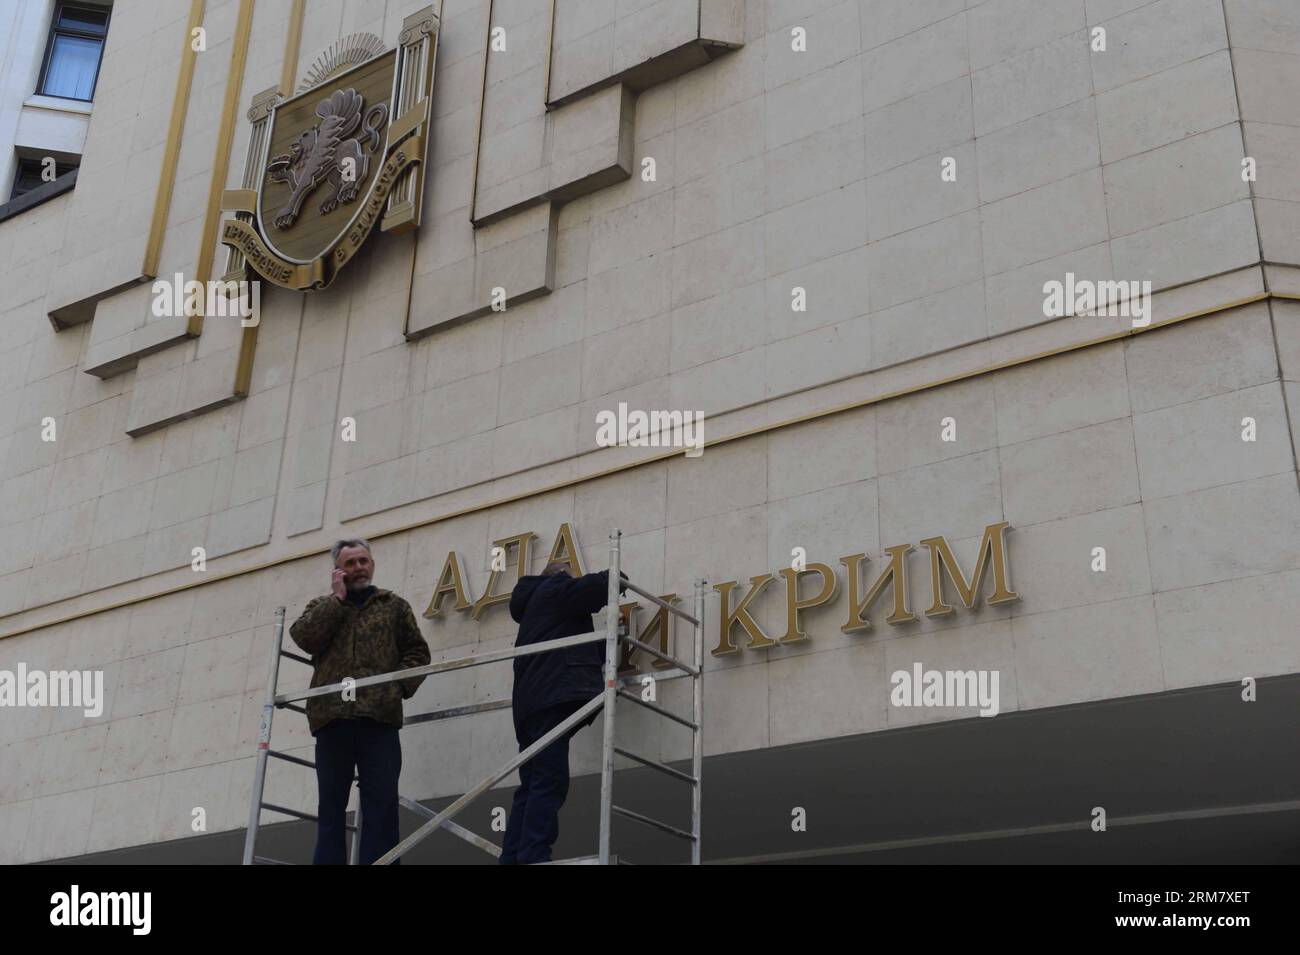 (140318) -- SIMFEROPOL, March 18, 2014 (Xinhua) -- Workers dismantle the Ukrainian signs on Crimean Parliament building in Simferopol, the Republic of Crimea, March 18, 2014. Russian President Vladimir Putin and leaders of Crimea signed a treaty on Tuesday accepting the Republic of Crimea and the city of Sevastopol as part of the Russian territory. (Xinhua/Sadat) (srb) CRIMEA-SIMFEROPOL-RUSSIA-TREATY PUBLICATIONxNOTxINxCHN Stock Photo